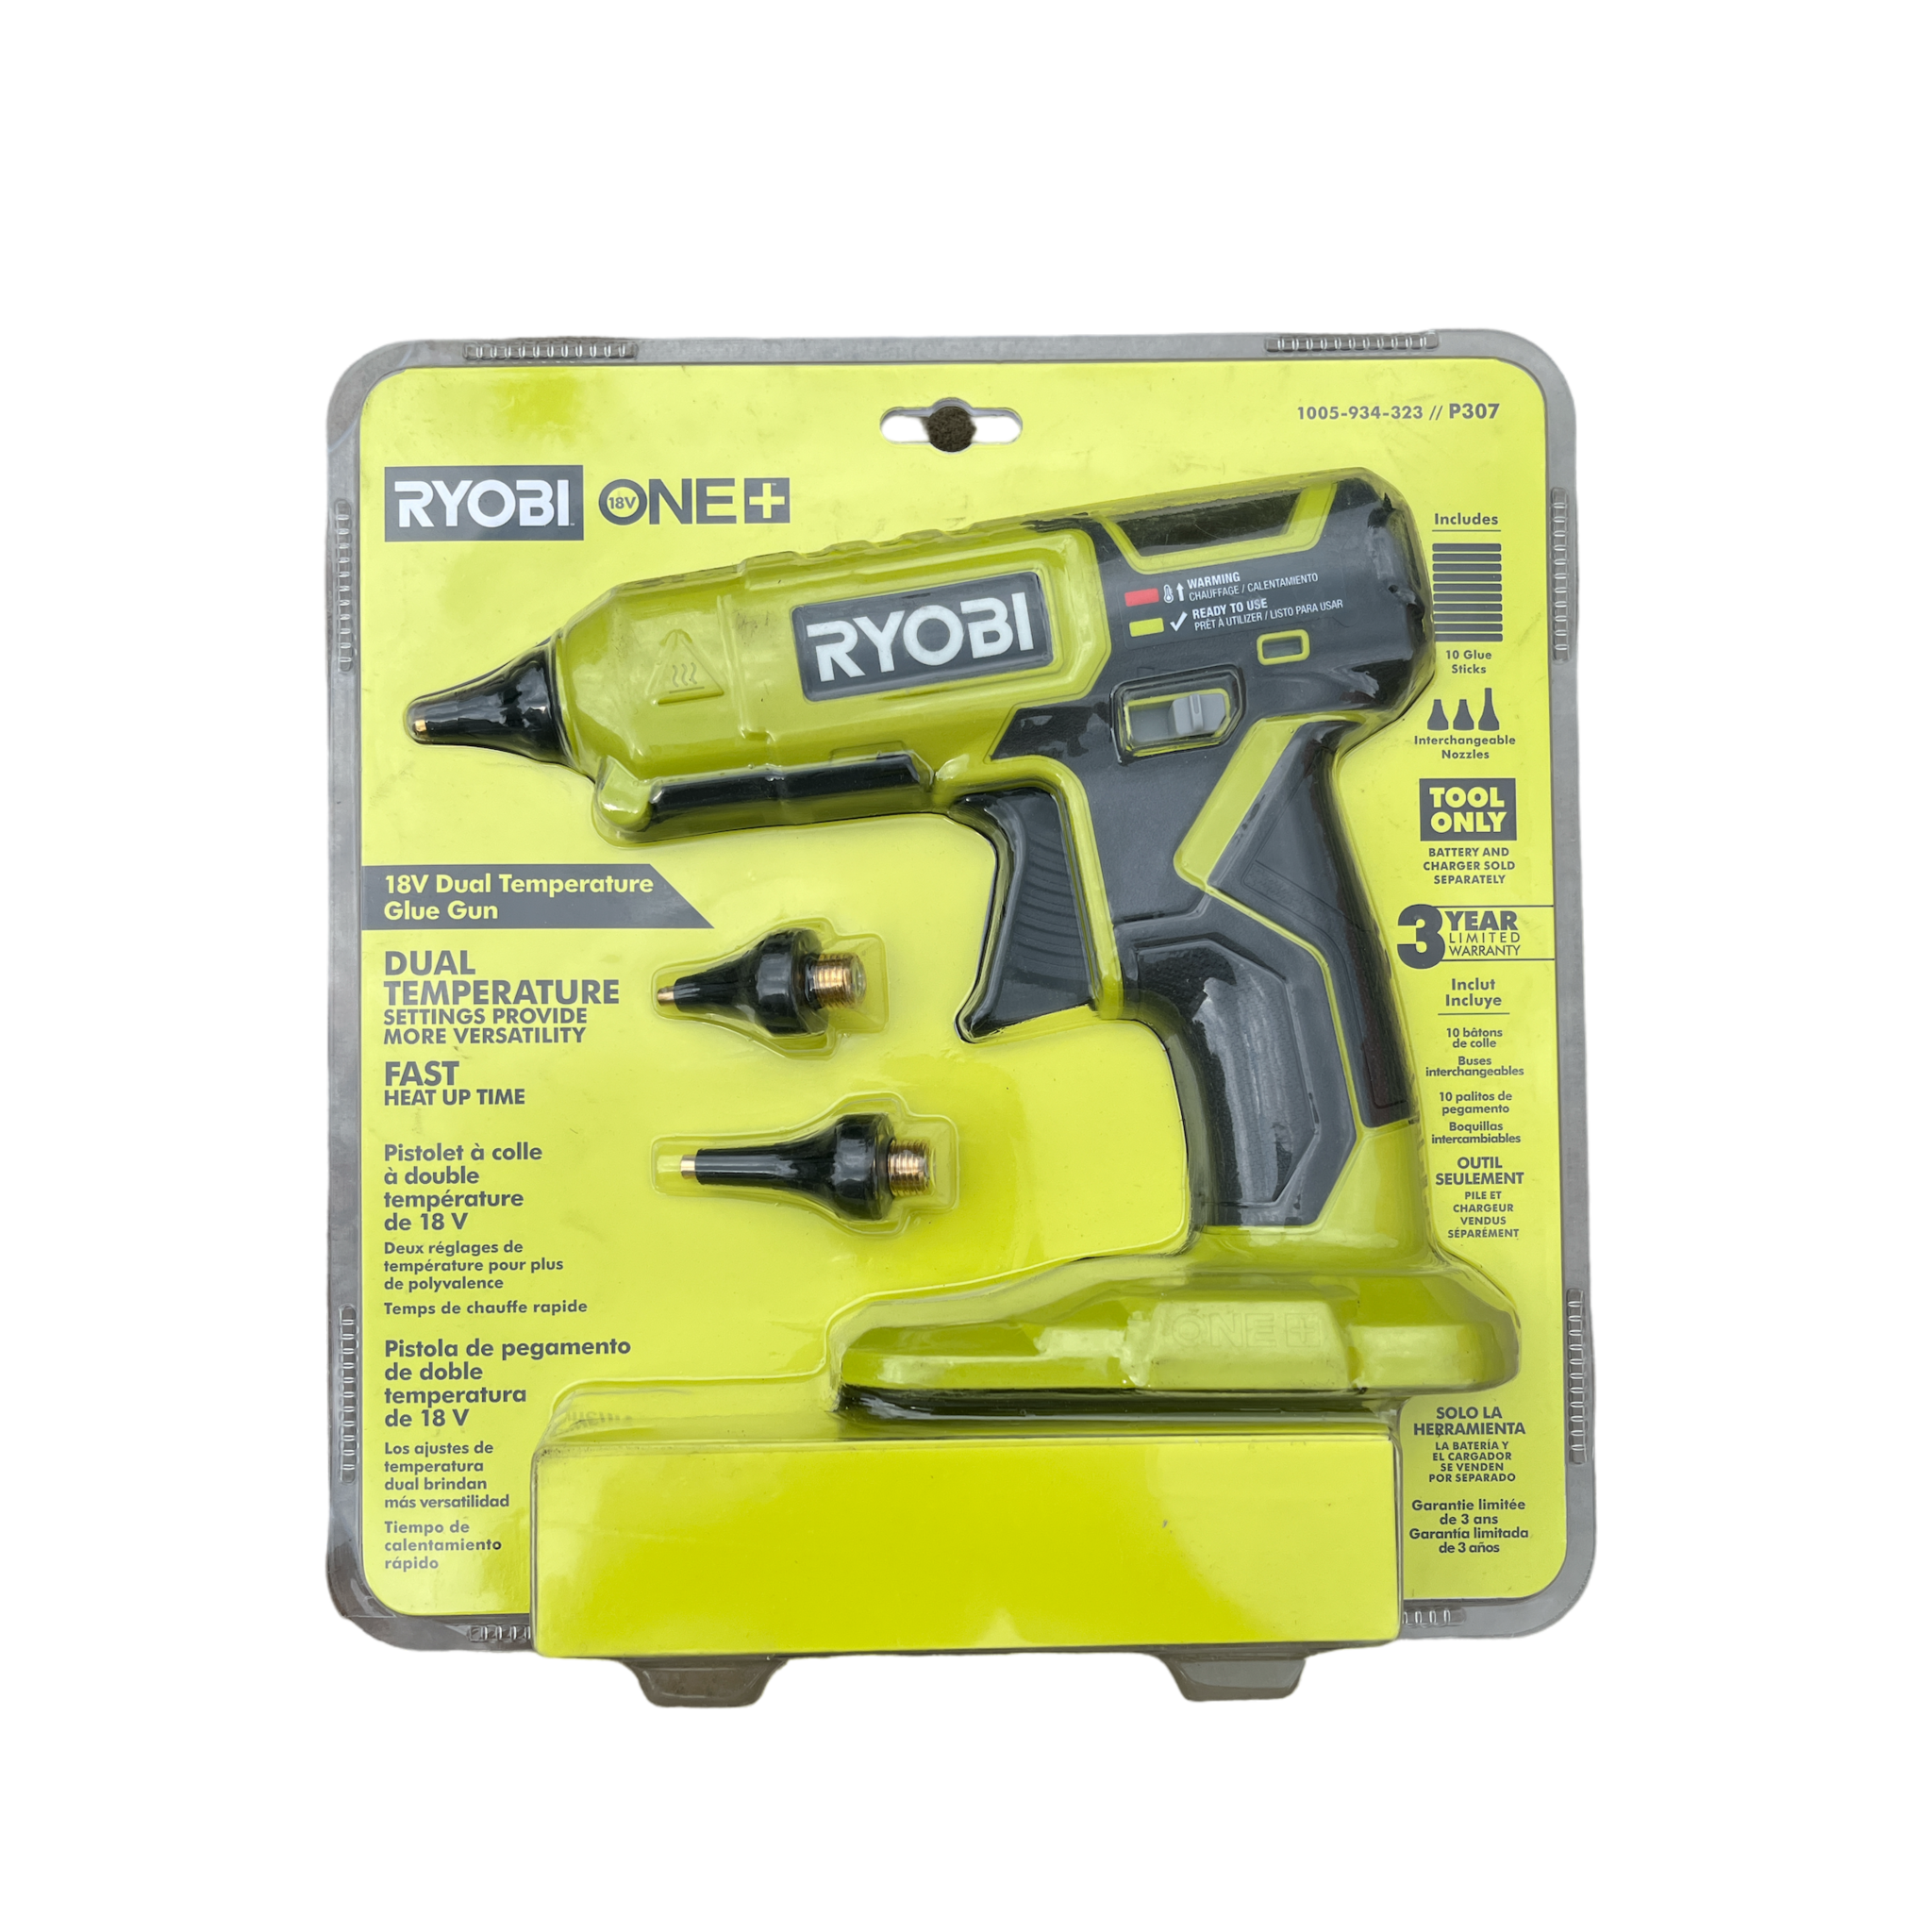 RYOBI ONE+ 18V Cordless Dual Temperature Glue Gun Kit w/ 2.0 Ah Battery,  Charger & Full-Size Variety Color Glue Sticks (24Pck) P307K1N-A1932405 -  The Home Depot